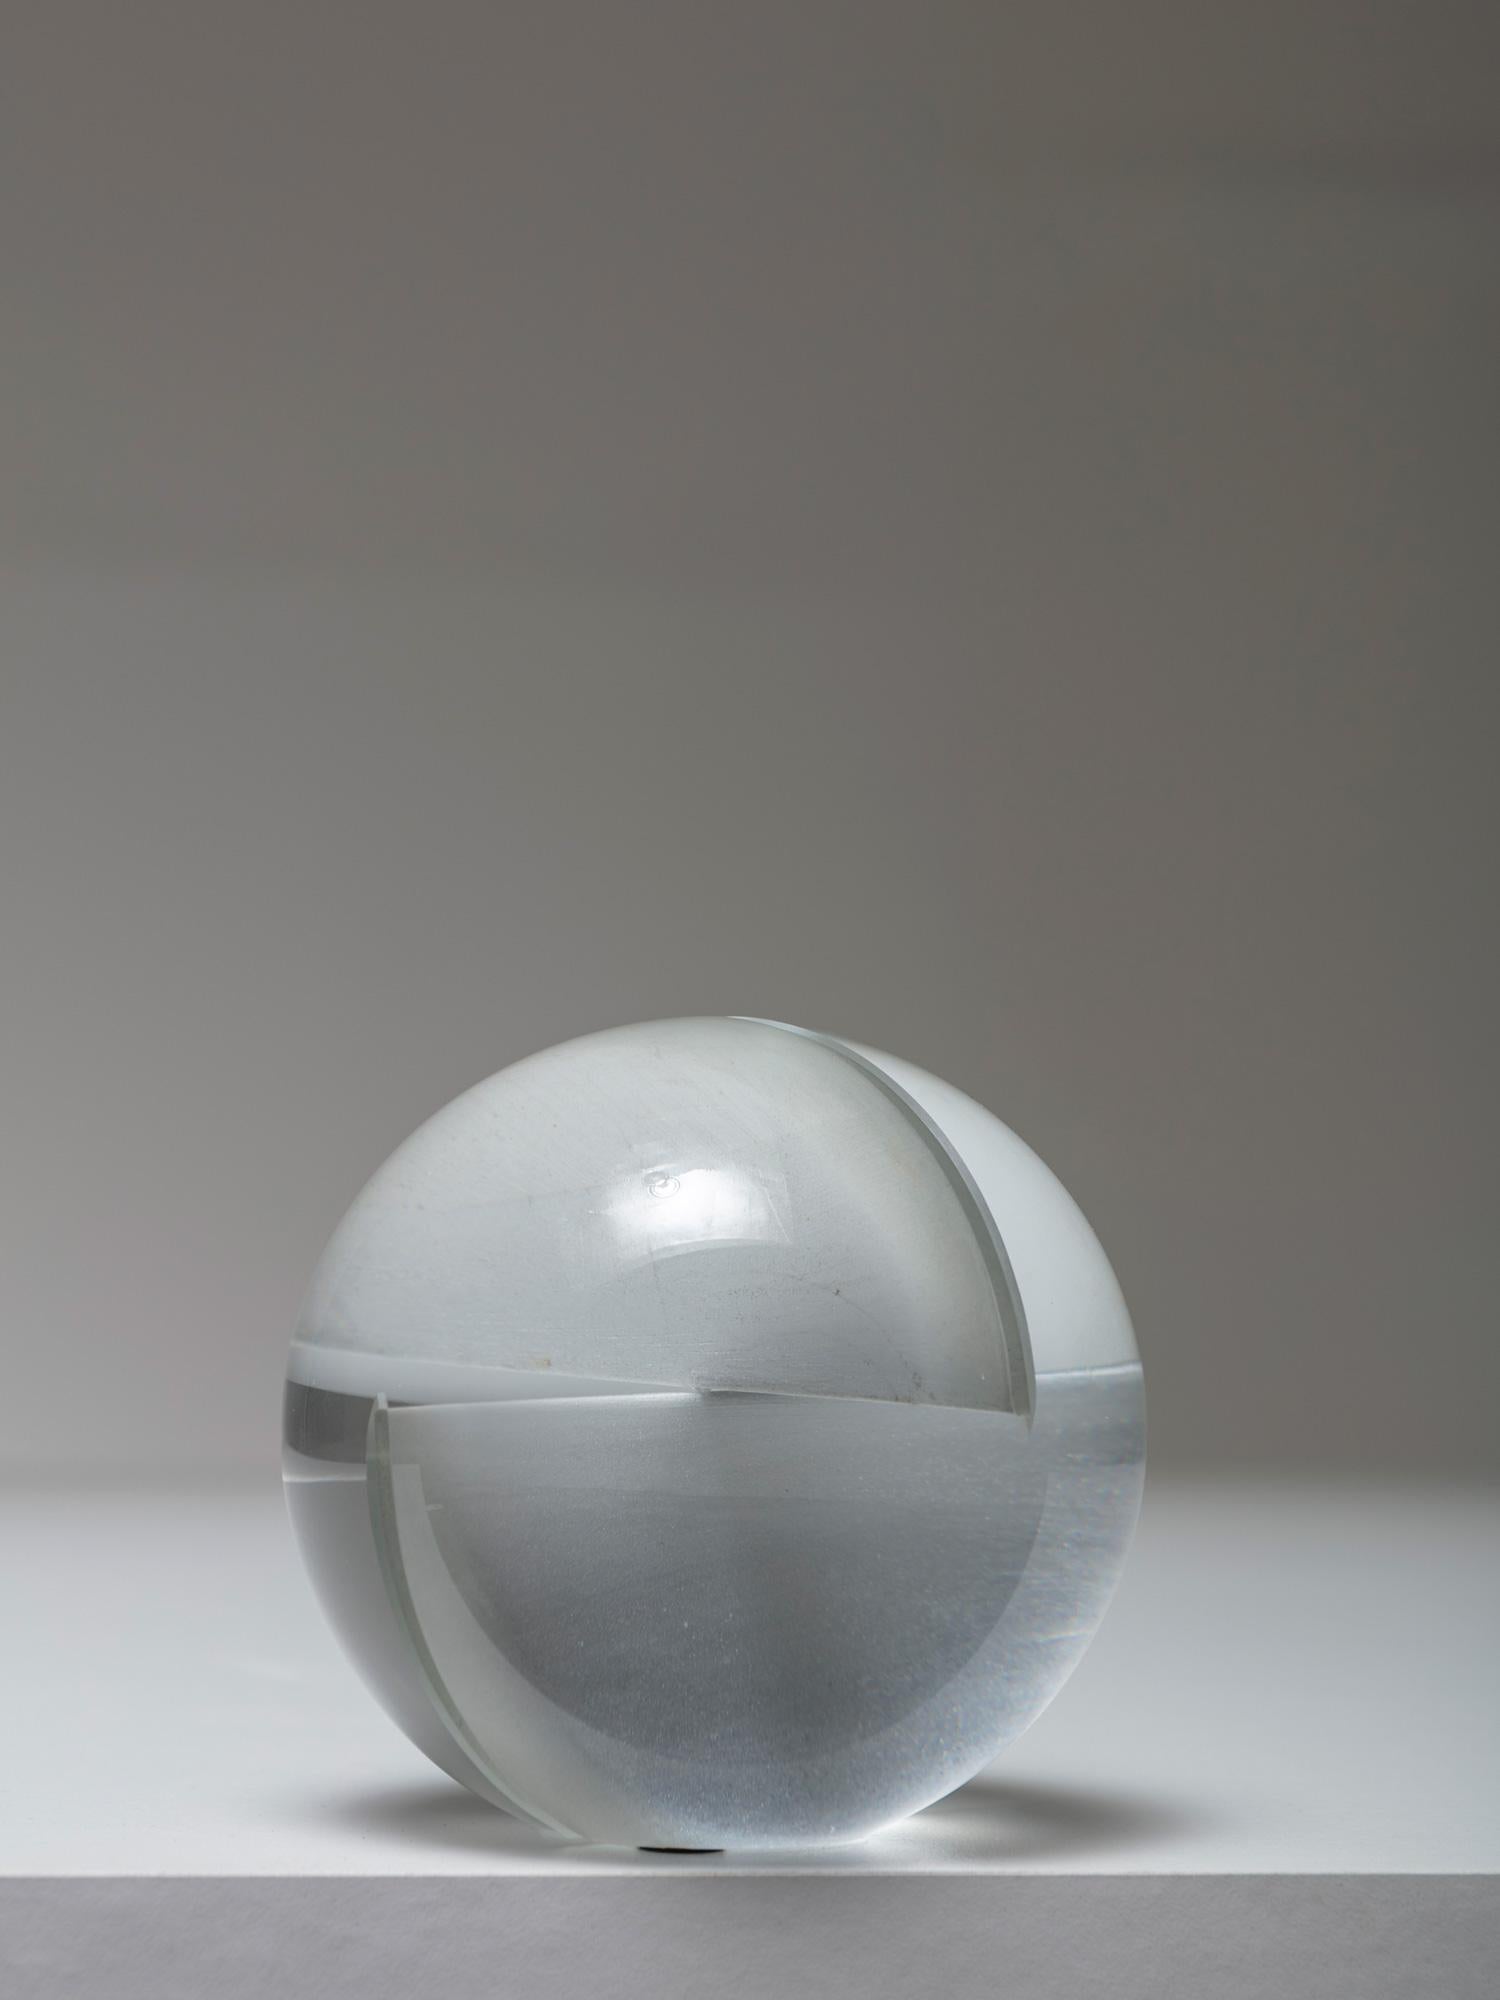 Gorgeous crystal sphere by Floris Meydam for Leerdam
Solid glass sculpture generated by two orthogonal cuts.